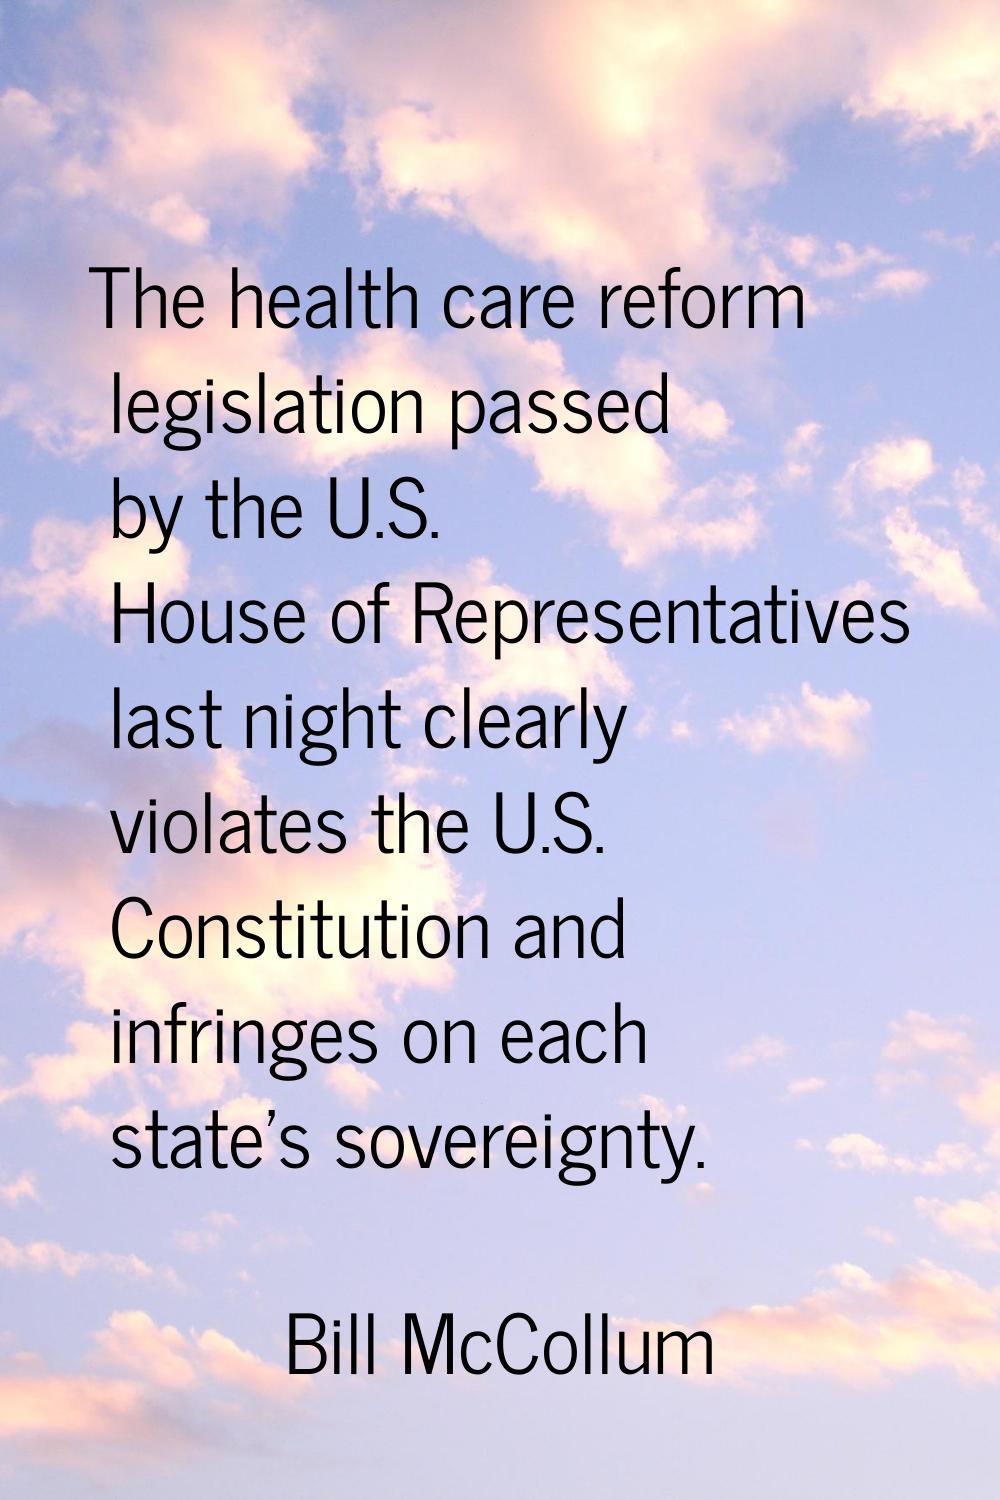 The health care reform legislation passed by the U.S. House of Representatives last night clearly v